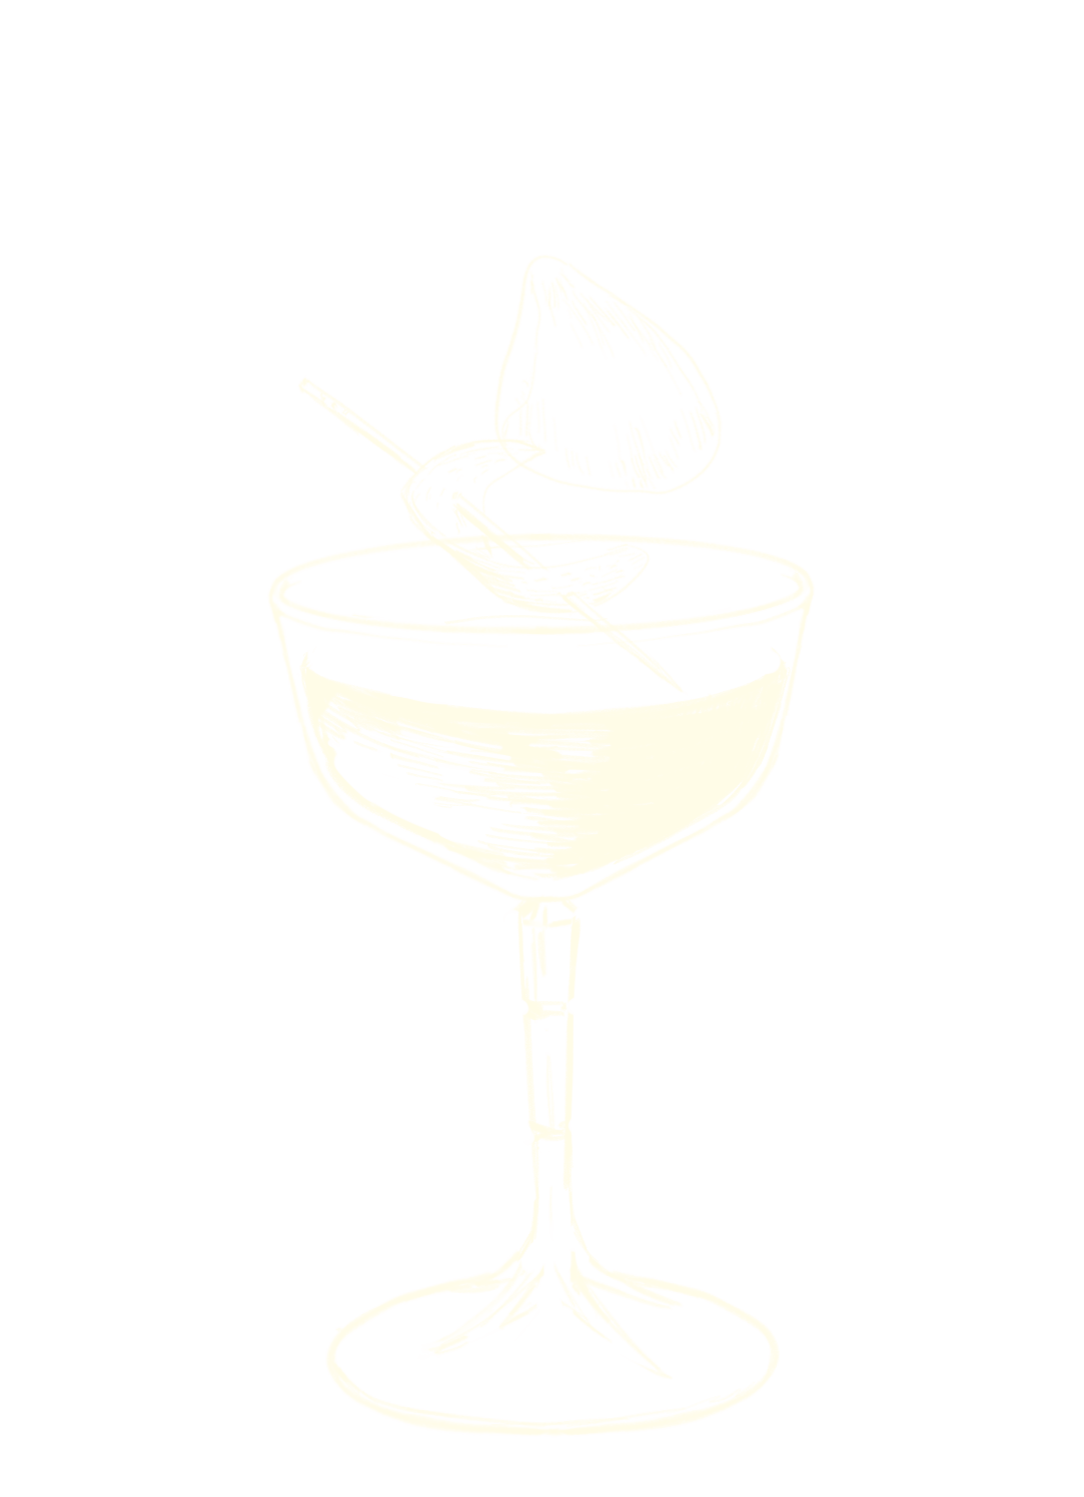 negative drawing of a coctail